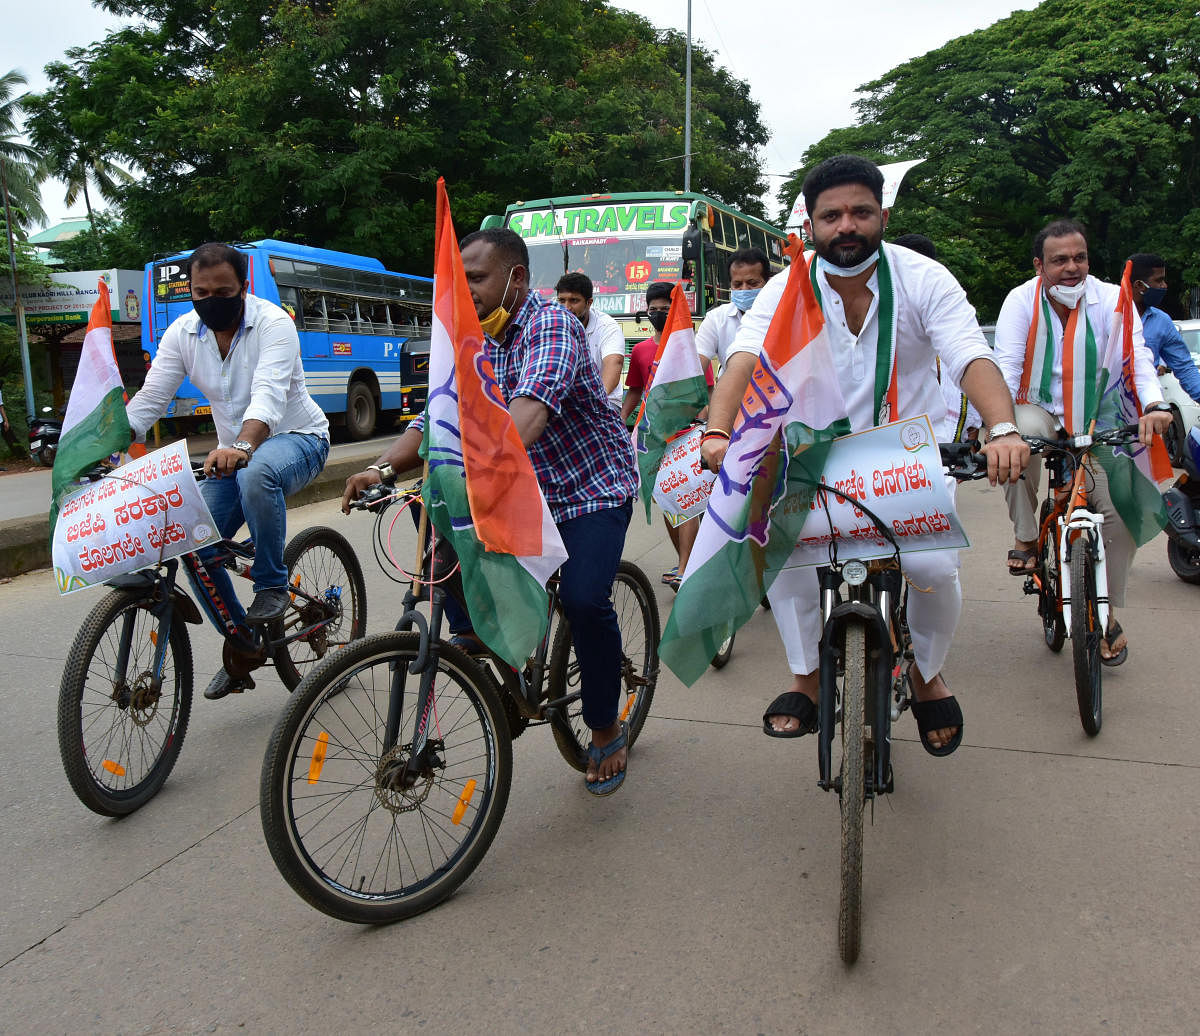 Fuel price hike: Cong holds cycle rally, CPM stages protest